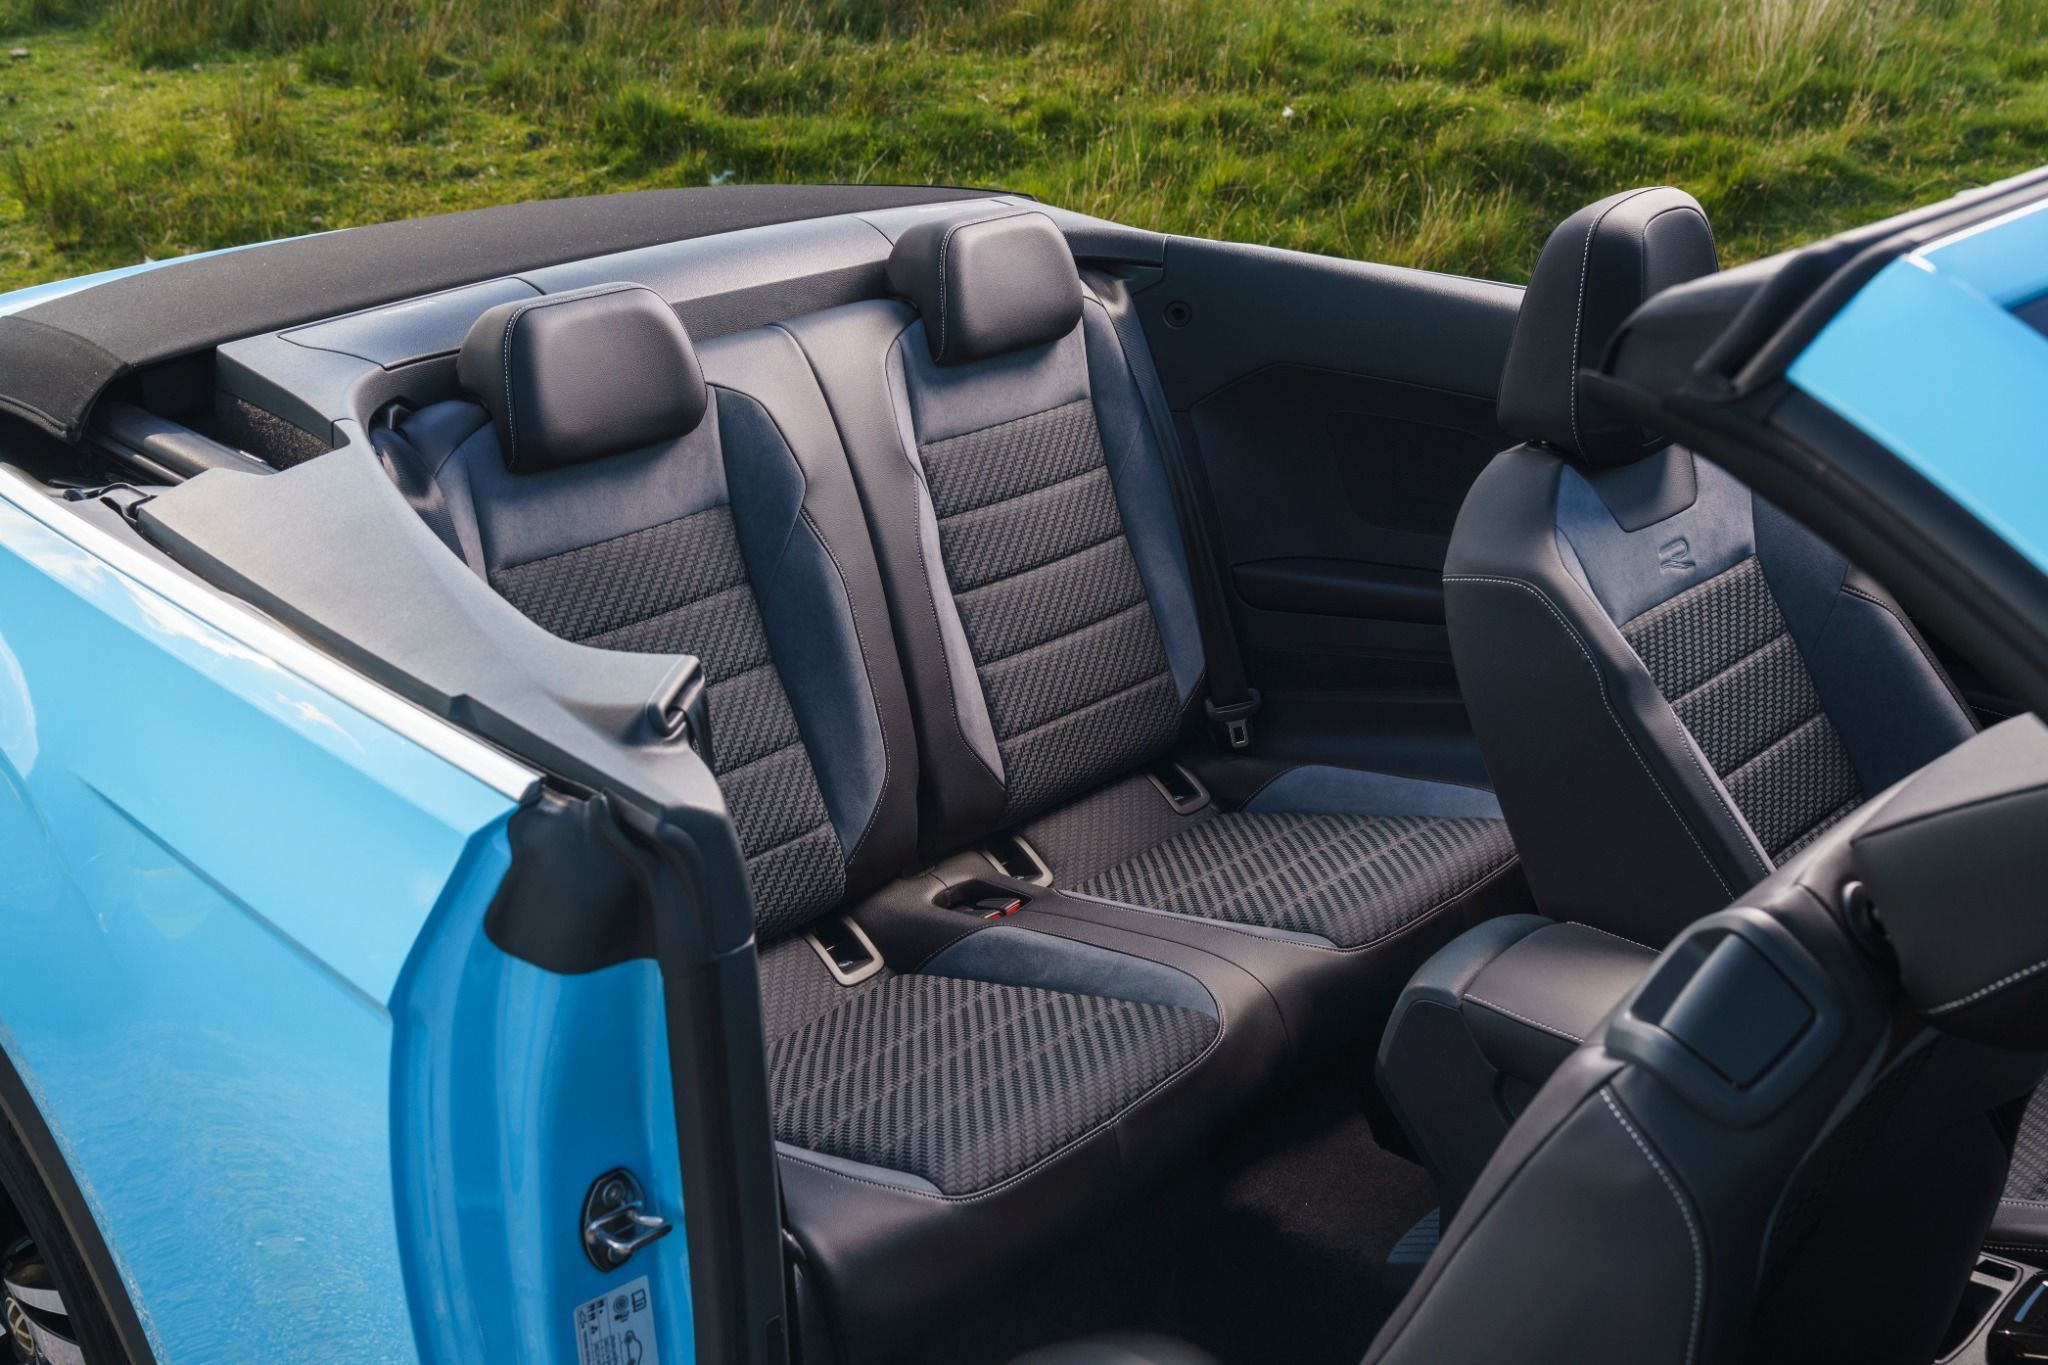 Rear seats of a blue VW Cabriolet